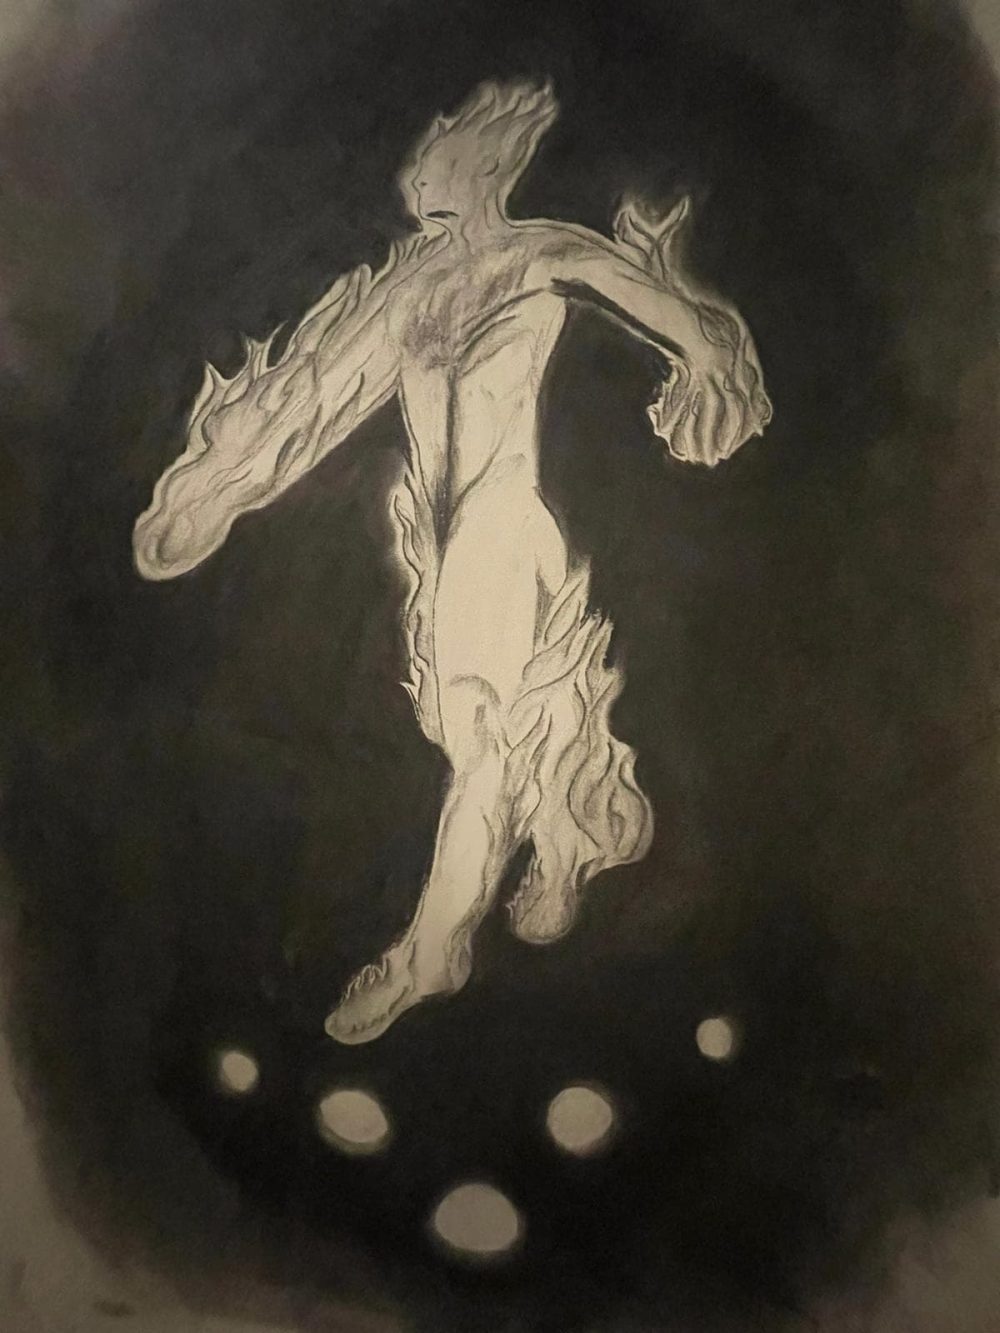 A black and white charcoal drawing of a figure on fire.